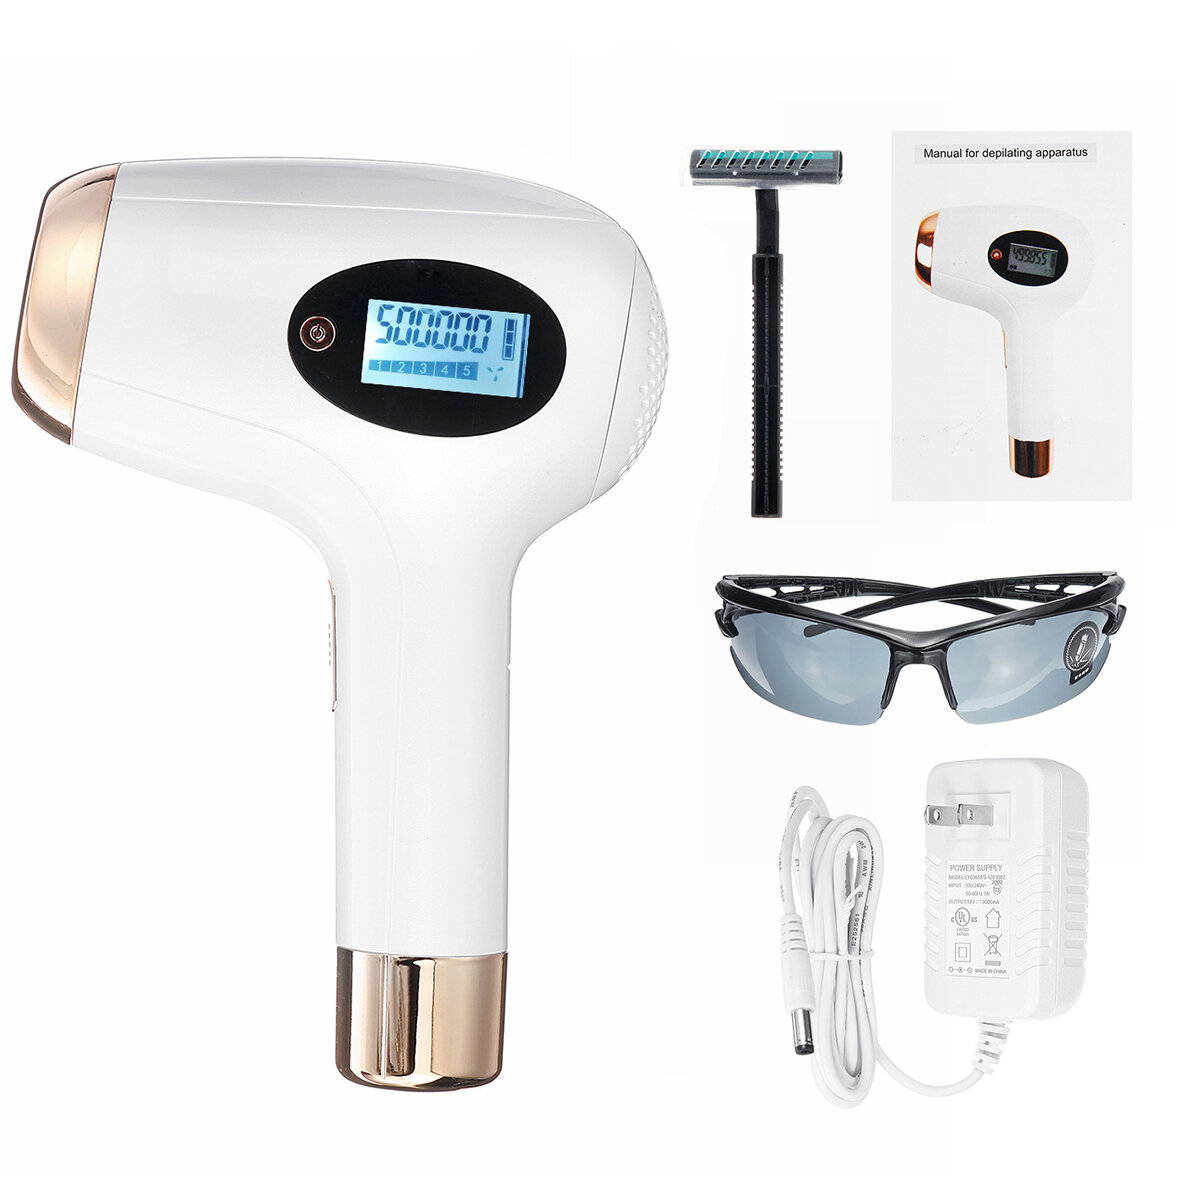 Image of 500000 Flashes Laser IPL Permanent Hair Removal Machine 5 Levels Face & Body Painless Epilator